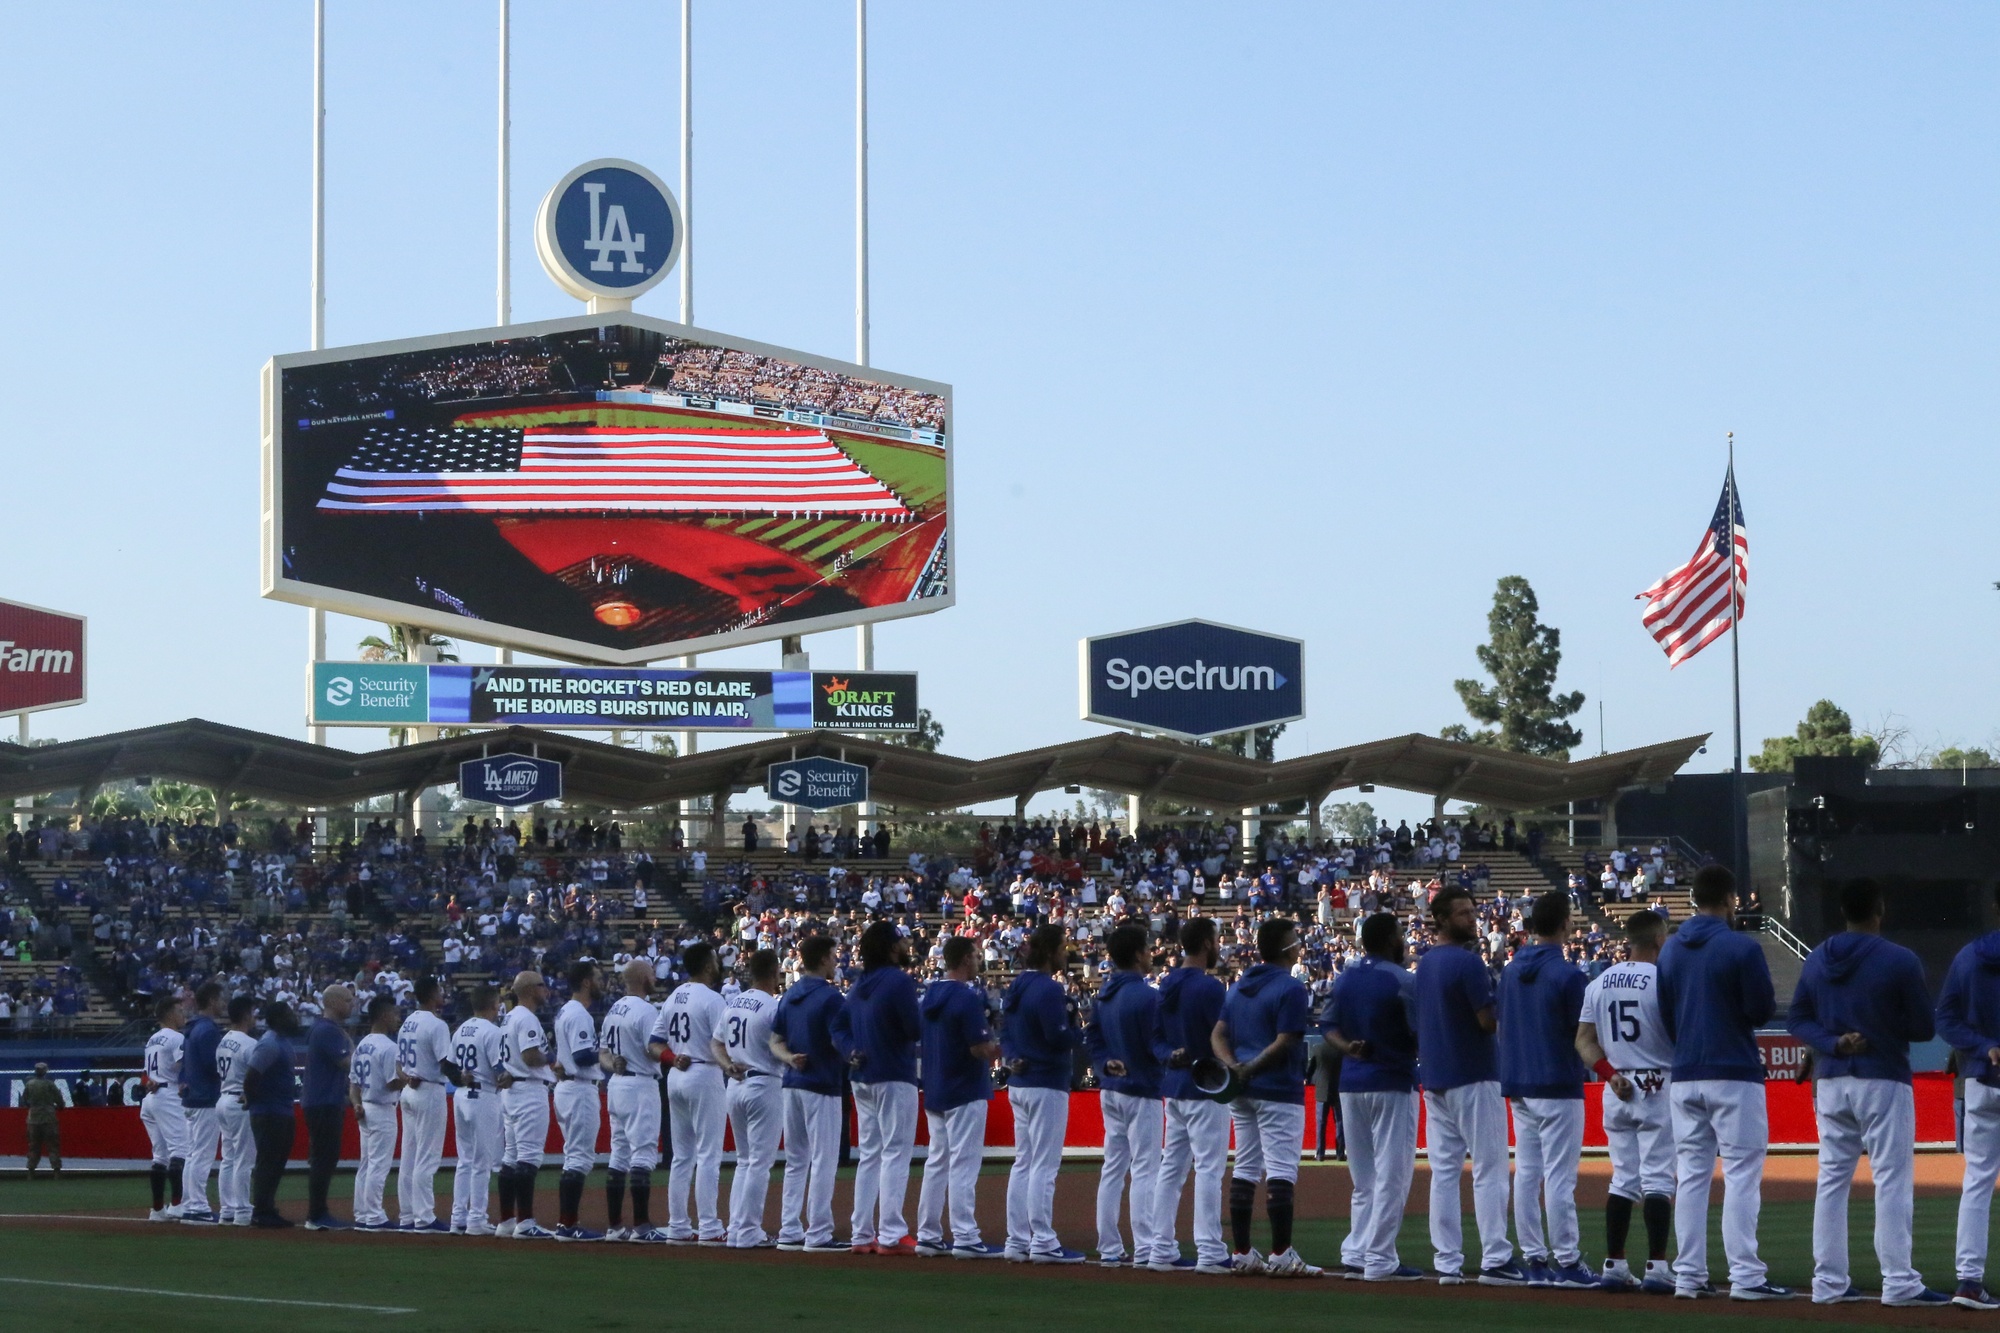 DVIDS - Images - Independence Day at Dodgers Stadium [Image 5 of 9]